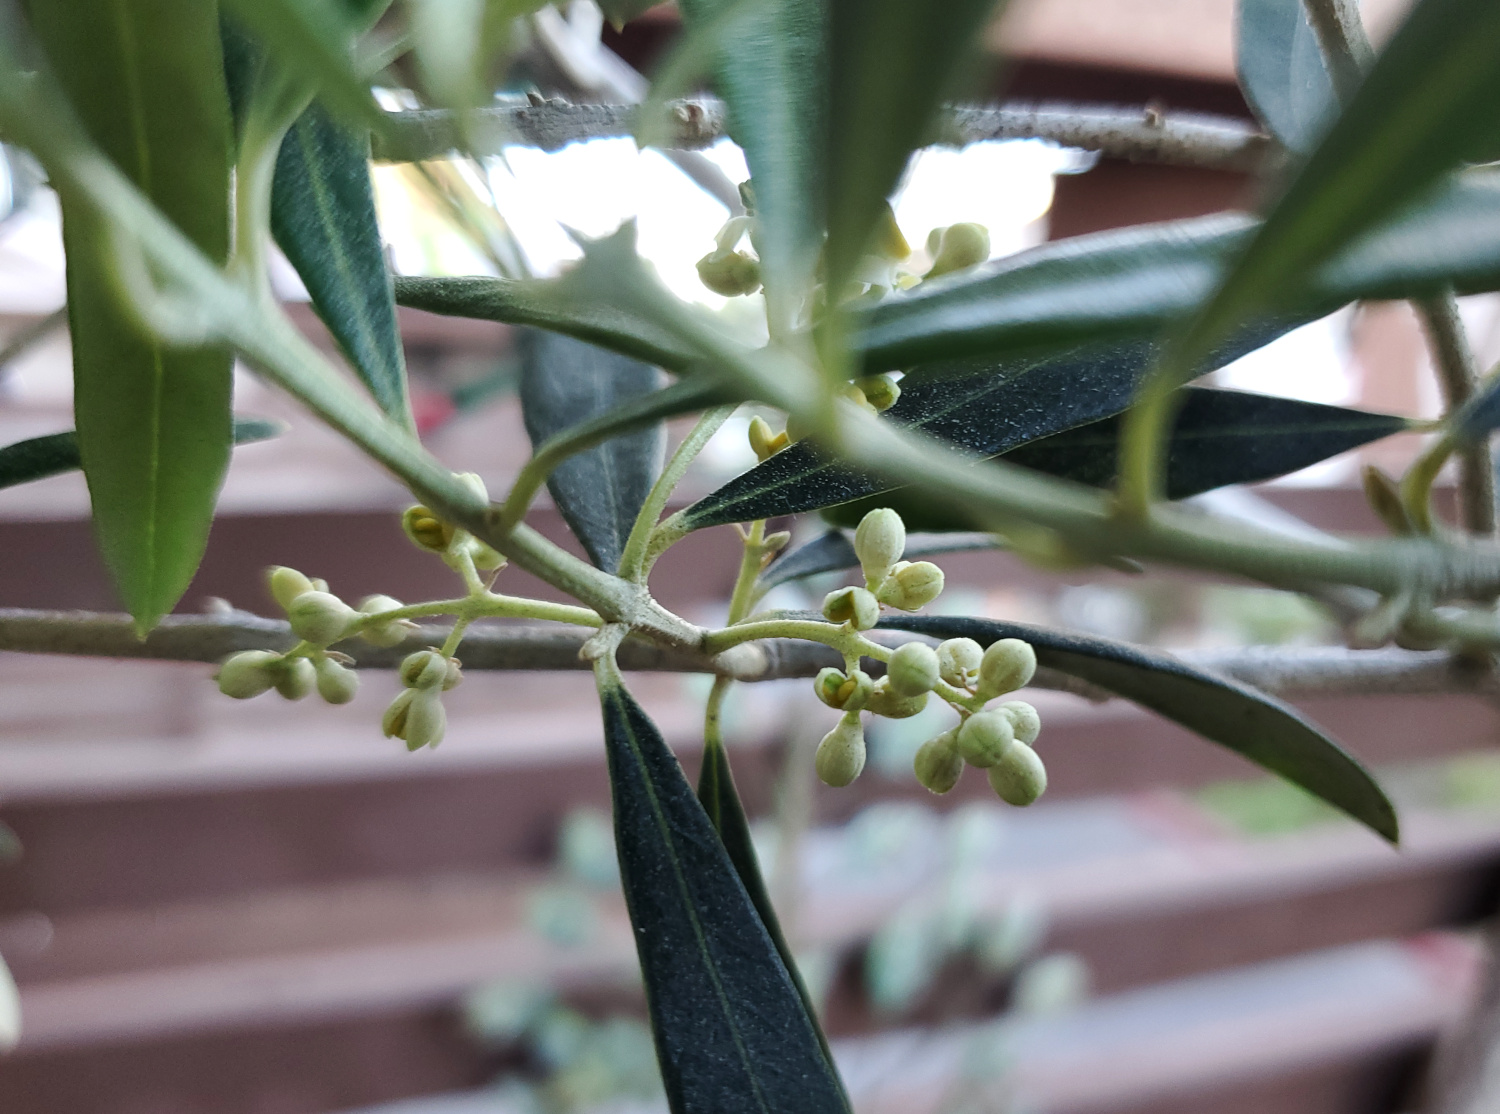 Some of the olive tree blooms are opening up